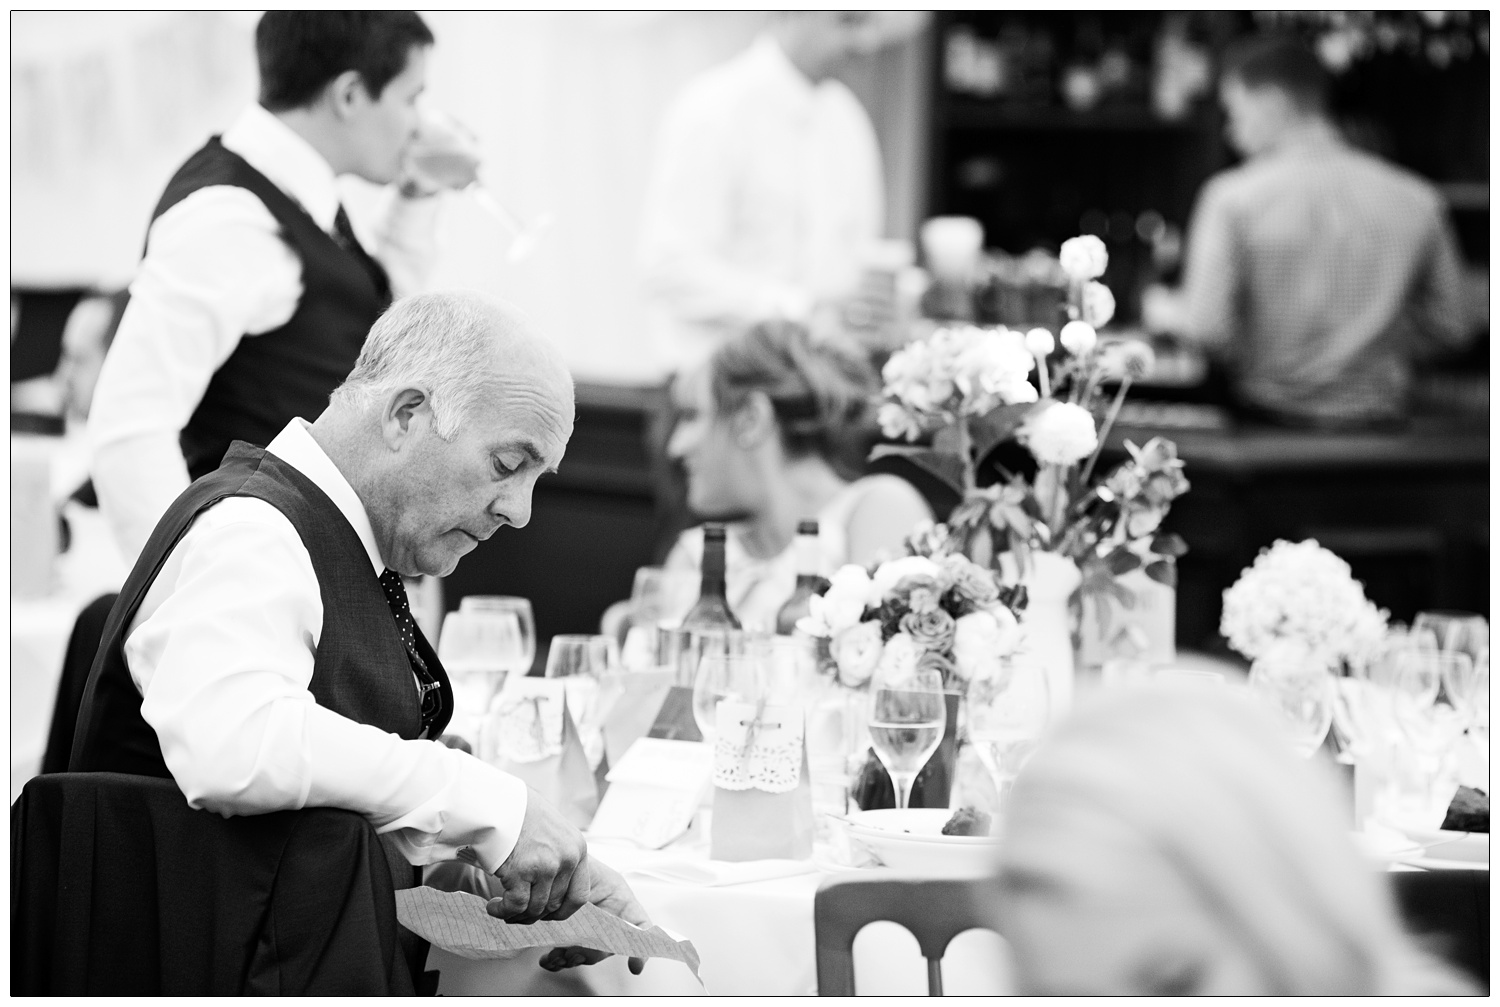 The father of the bride checks his speech over while he sits at a table.